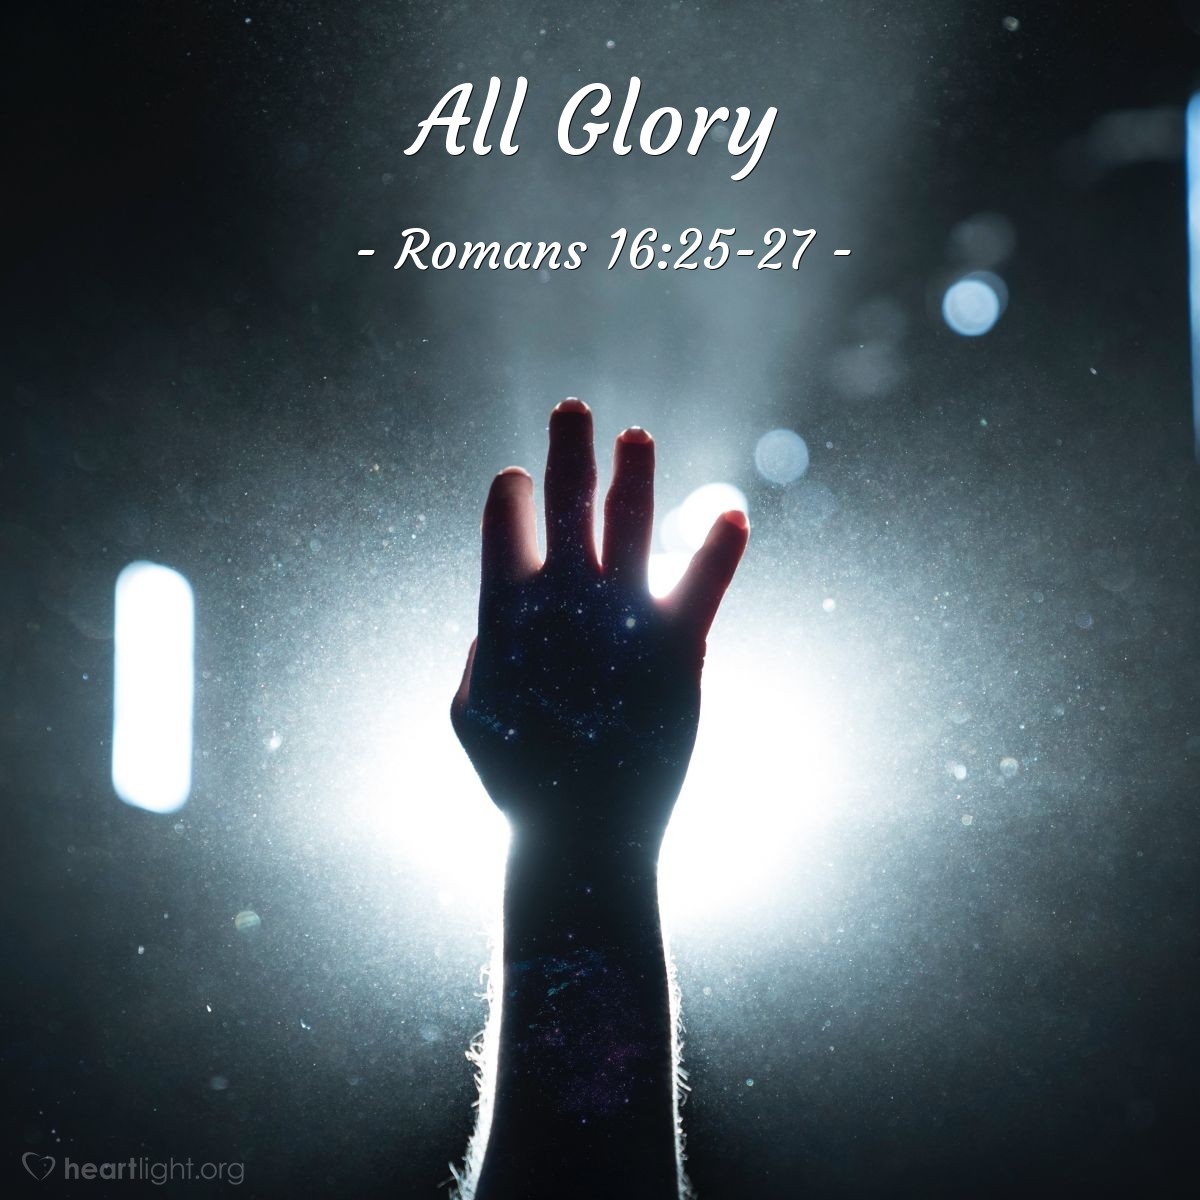 Illustration of Romans 16:25-27 — Now all glory to God, who is able to make you strong, just as my Good News says. This message about Jesus Christ has revealed his plan for you Gentiles, a plan kept secret from the beginning of time. But now ... this message is made known to all ... everywhere, so that they too may believe and obey him. All glory to the only wise God, through Jesus Christ, forever. Amen.